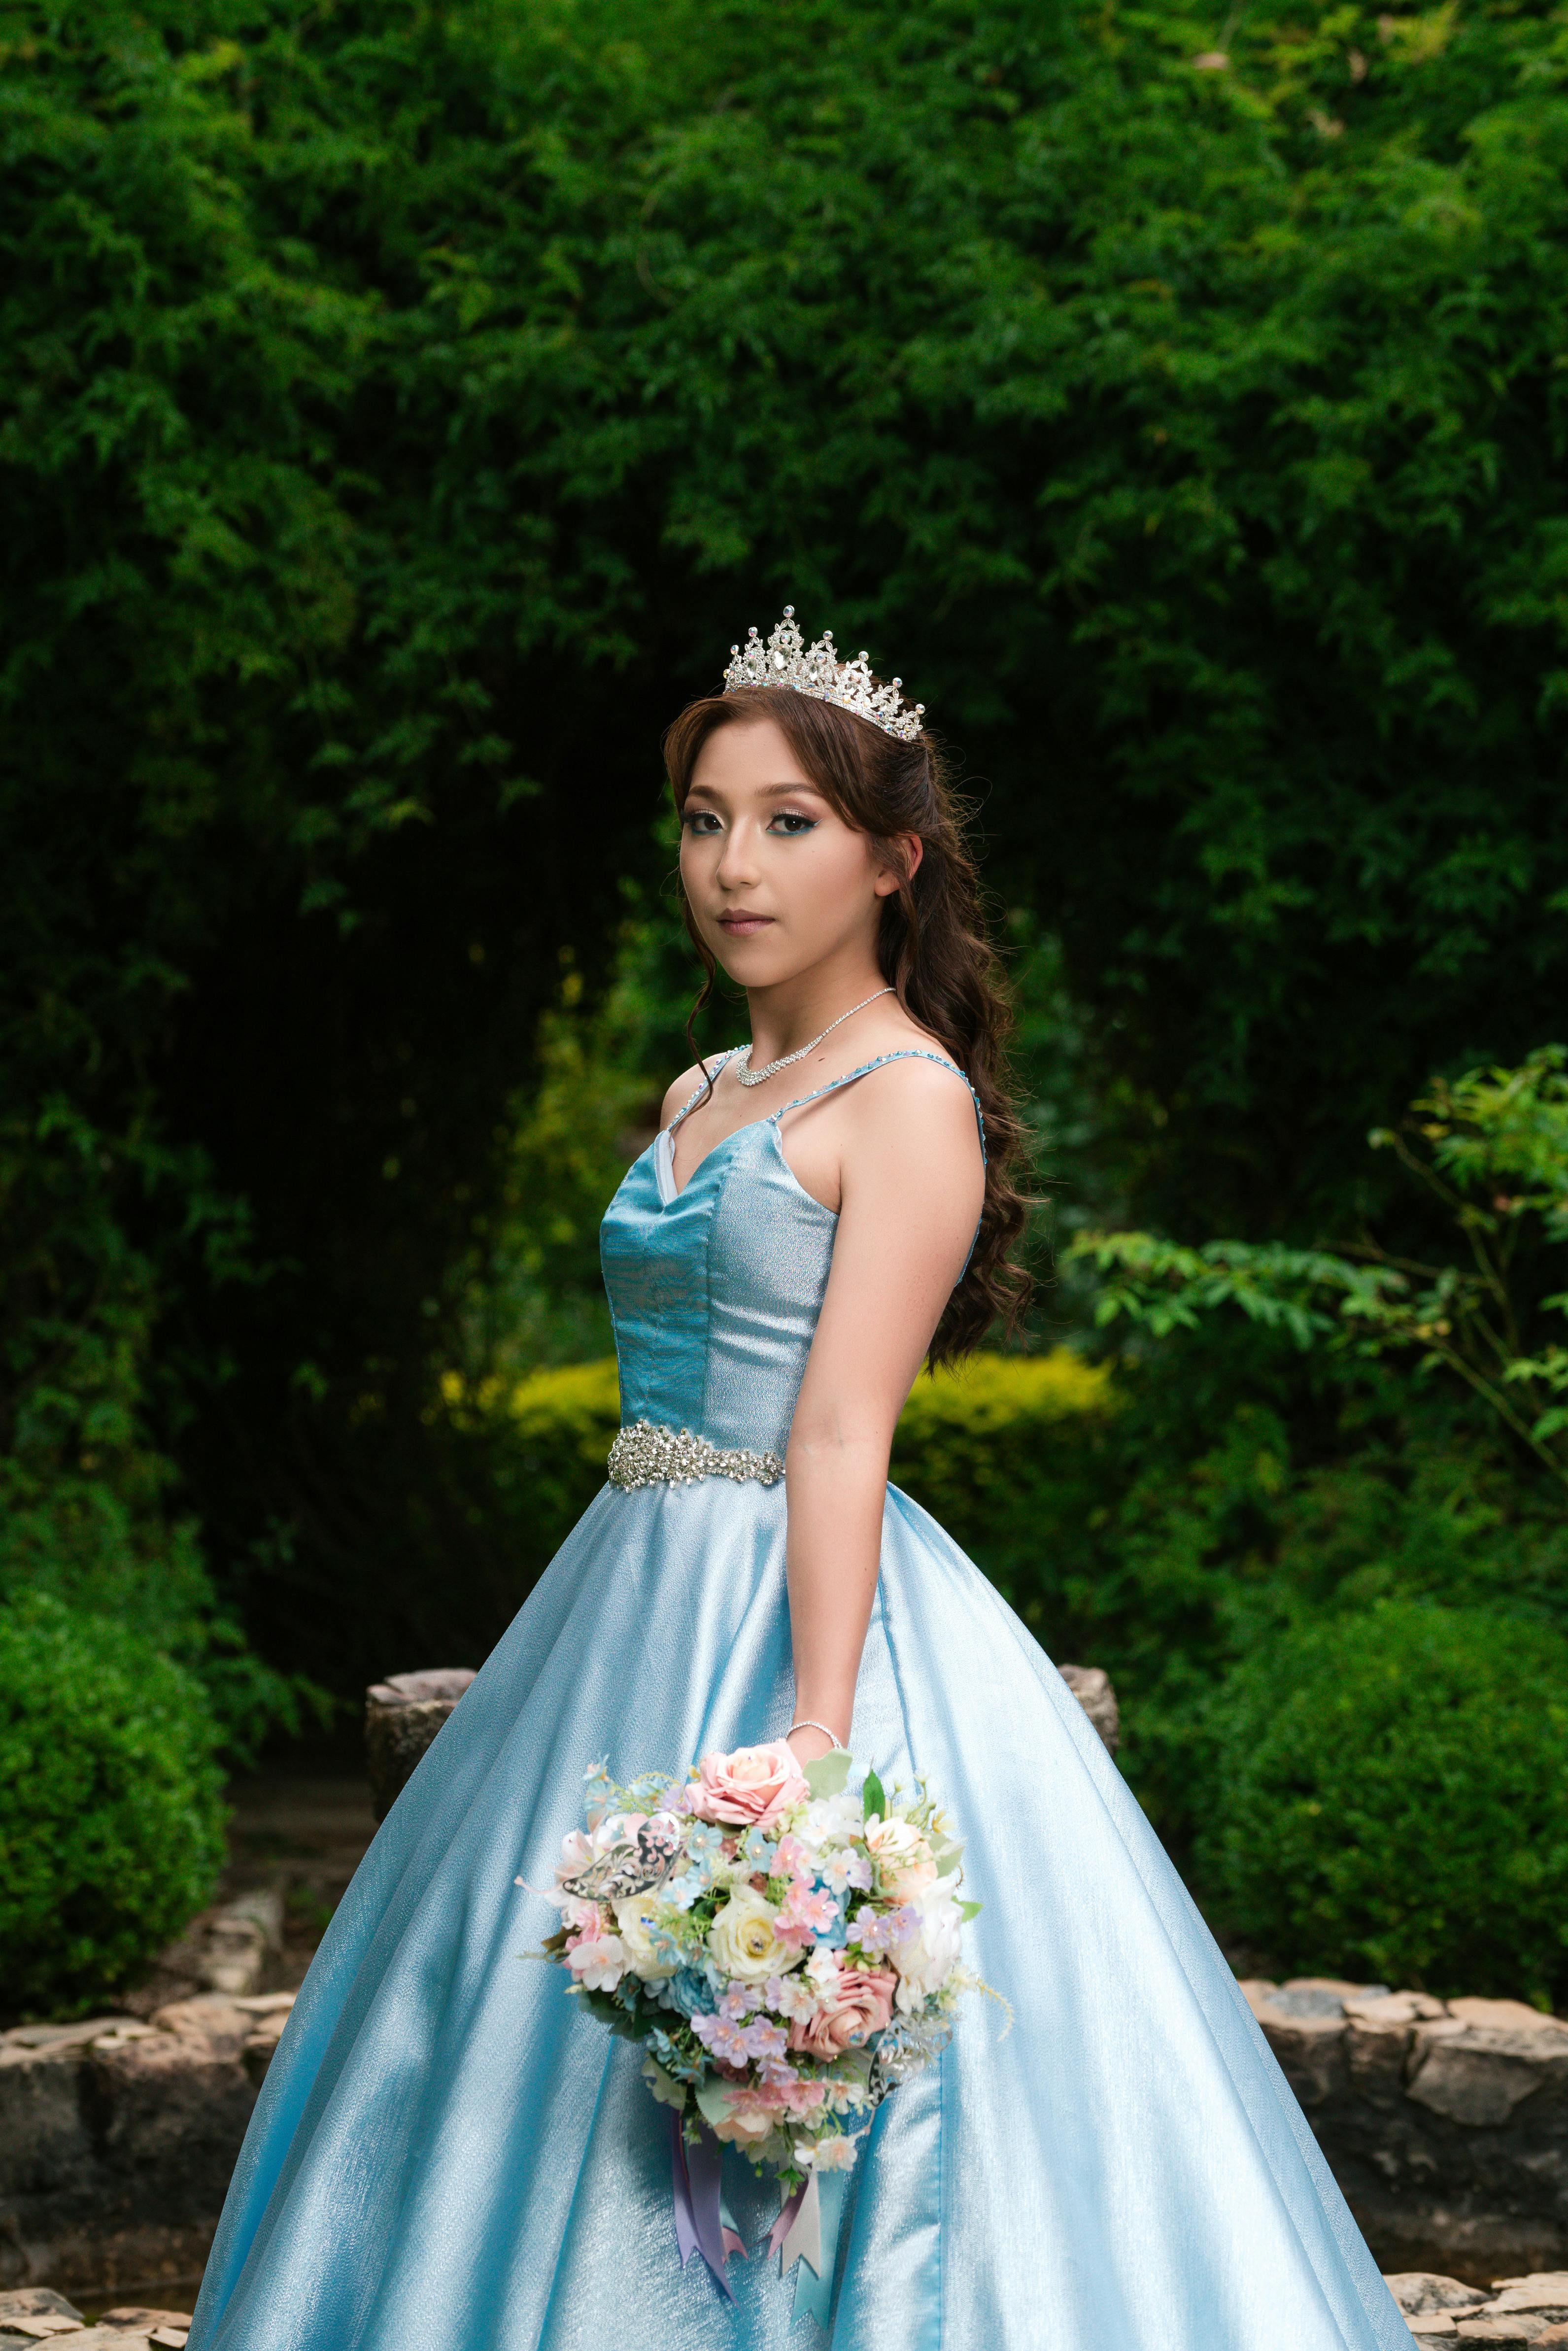 transform the girl in the image into a majestic princess. enhance her  beauty with a regal gown adorned with intricate details. add a sparkling  tiara on her head, fit for royalty. surround